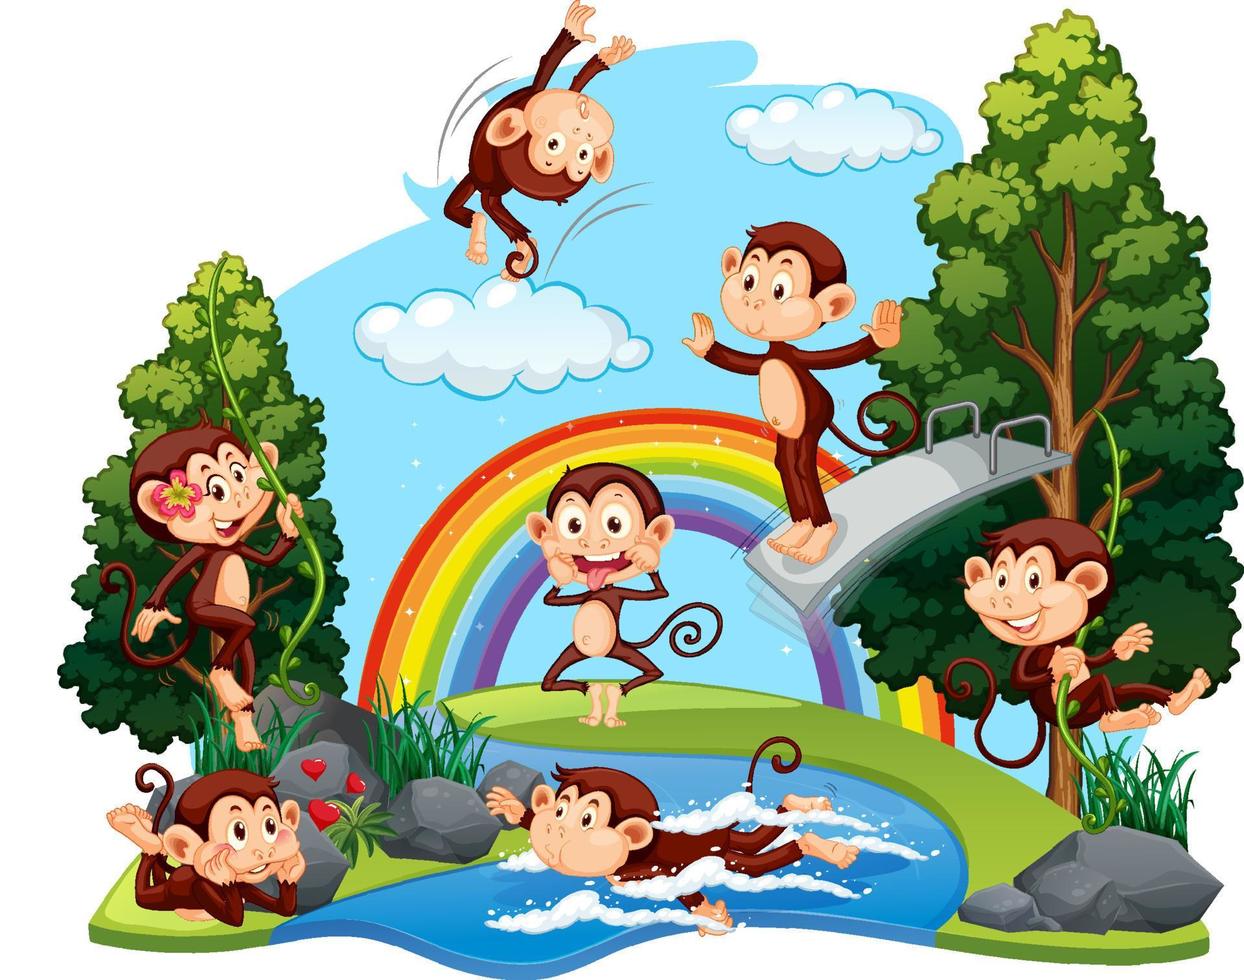 Funny monkeys playing in the forest vector